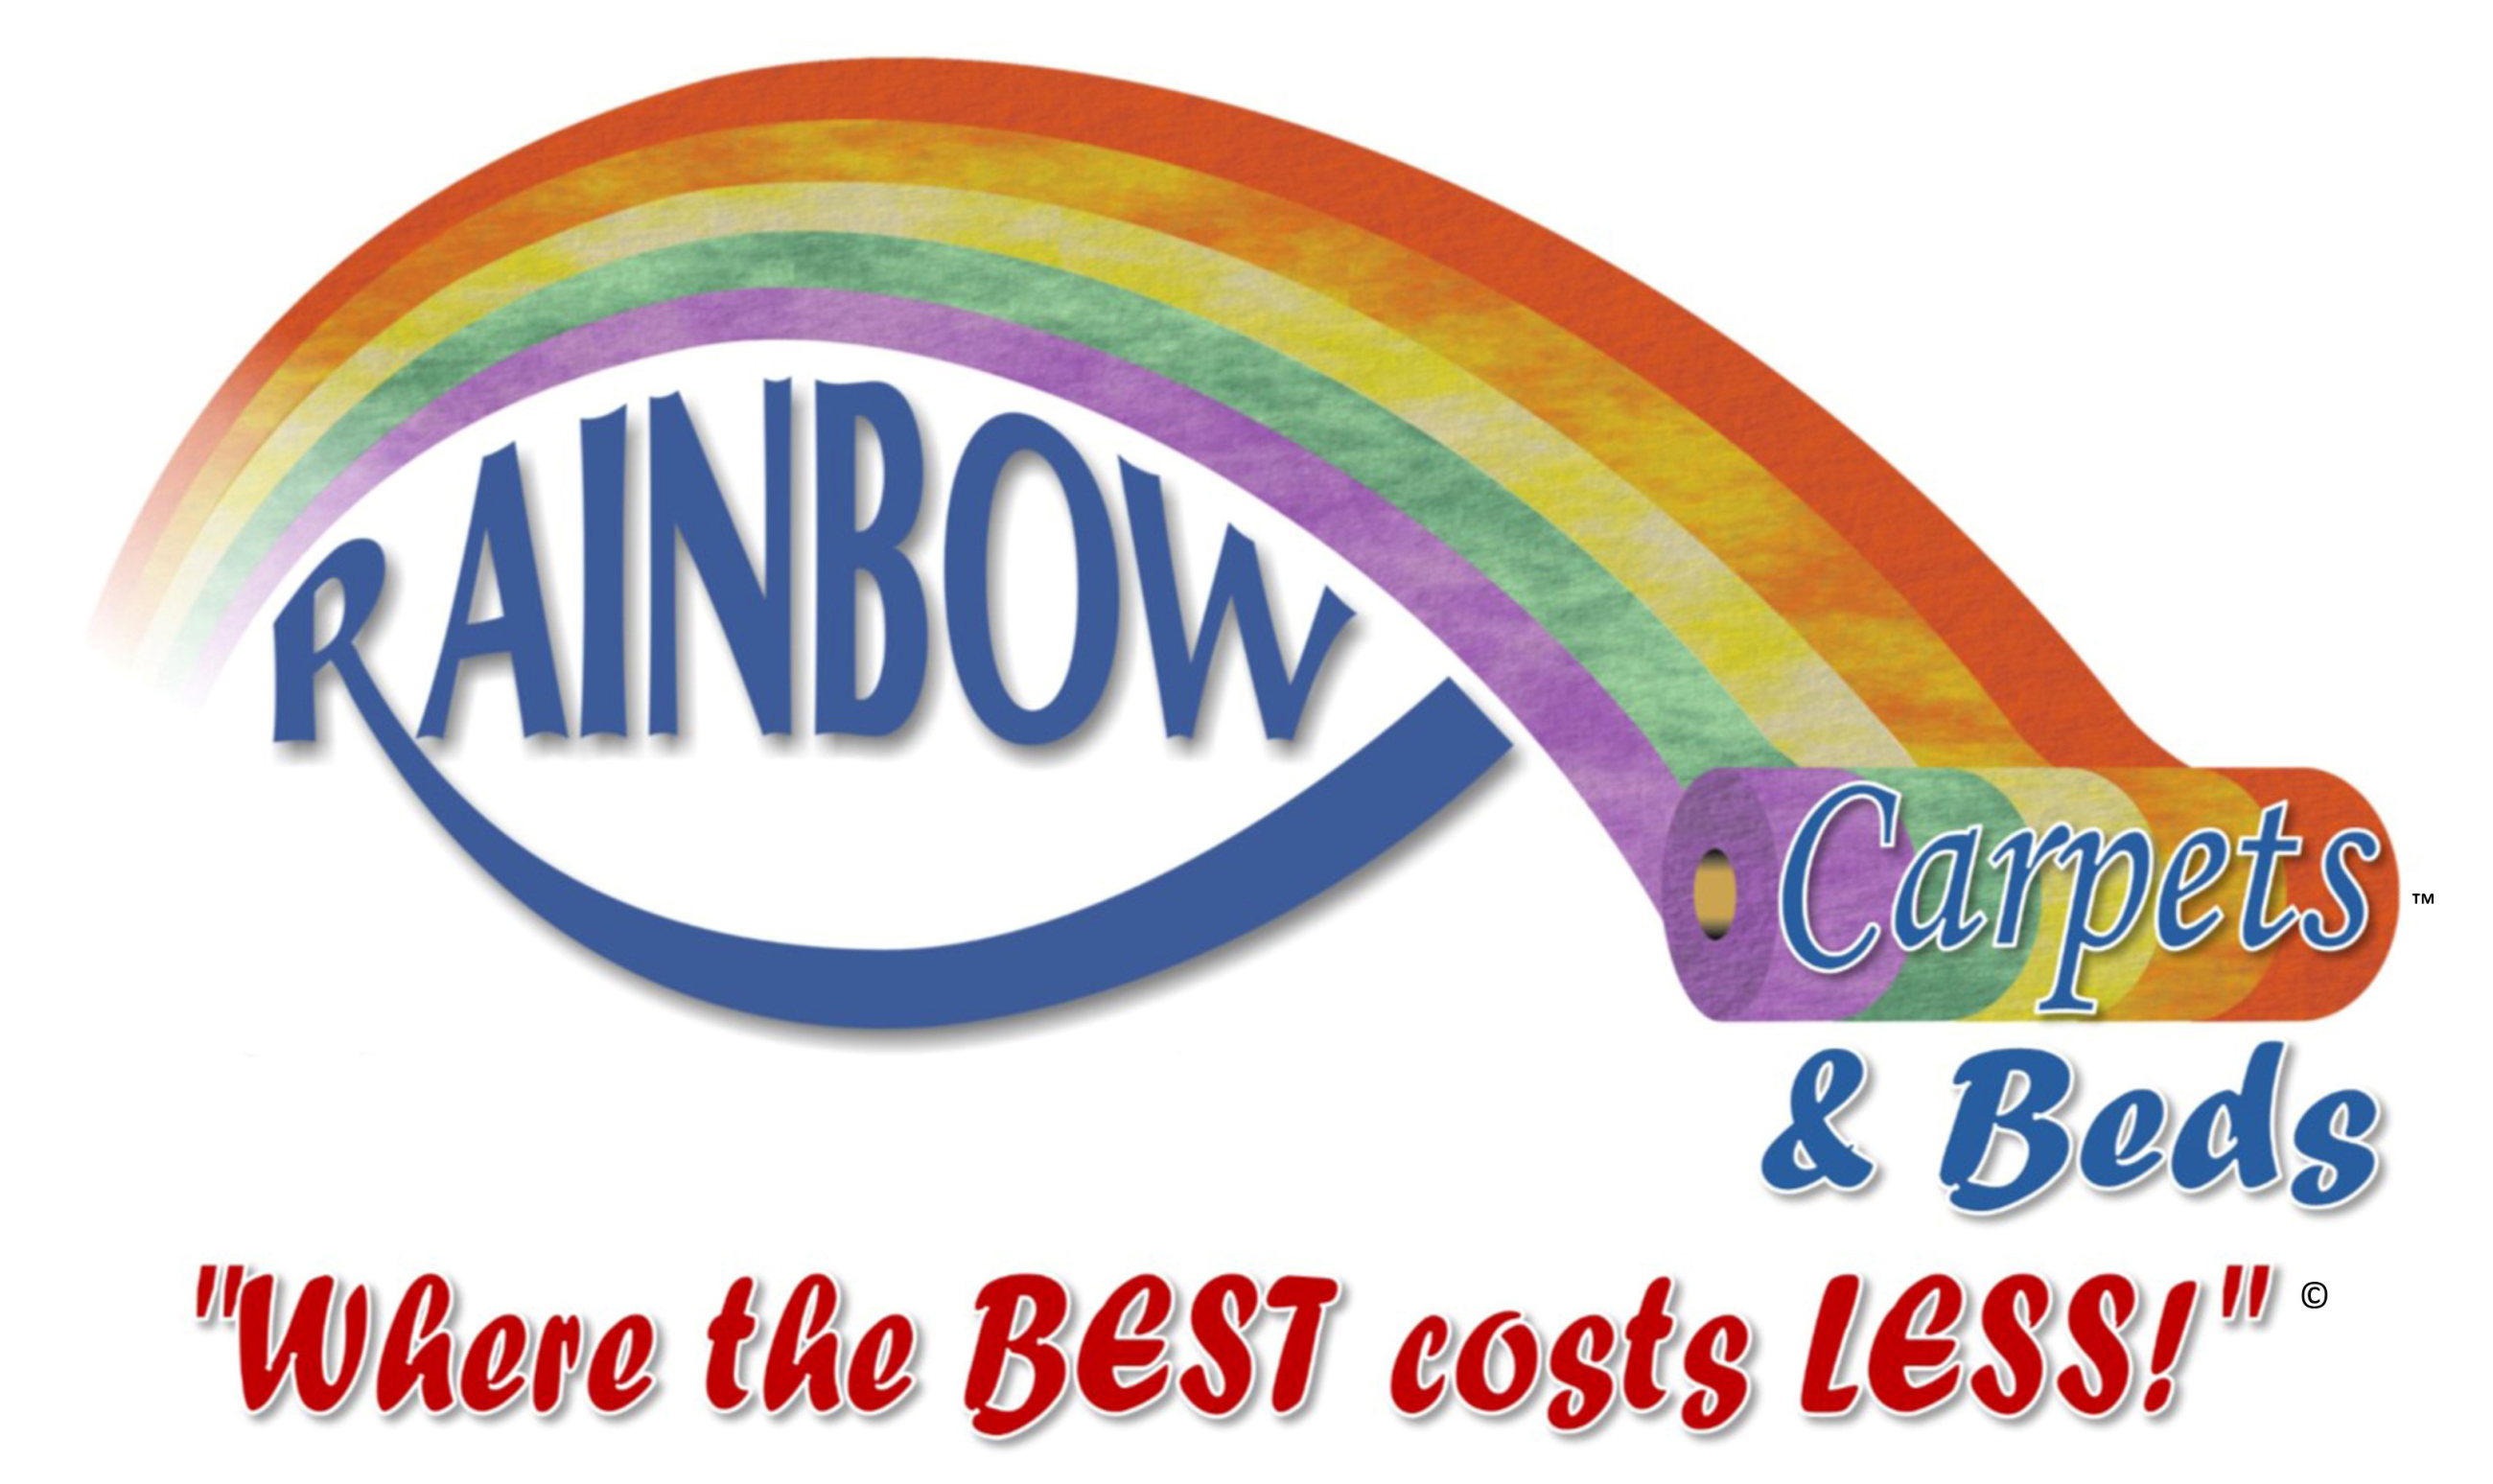 Rainbow Carpets & Beds - "Wgere the BEST costs LESS!"